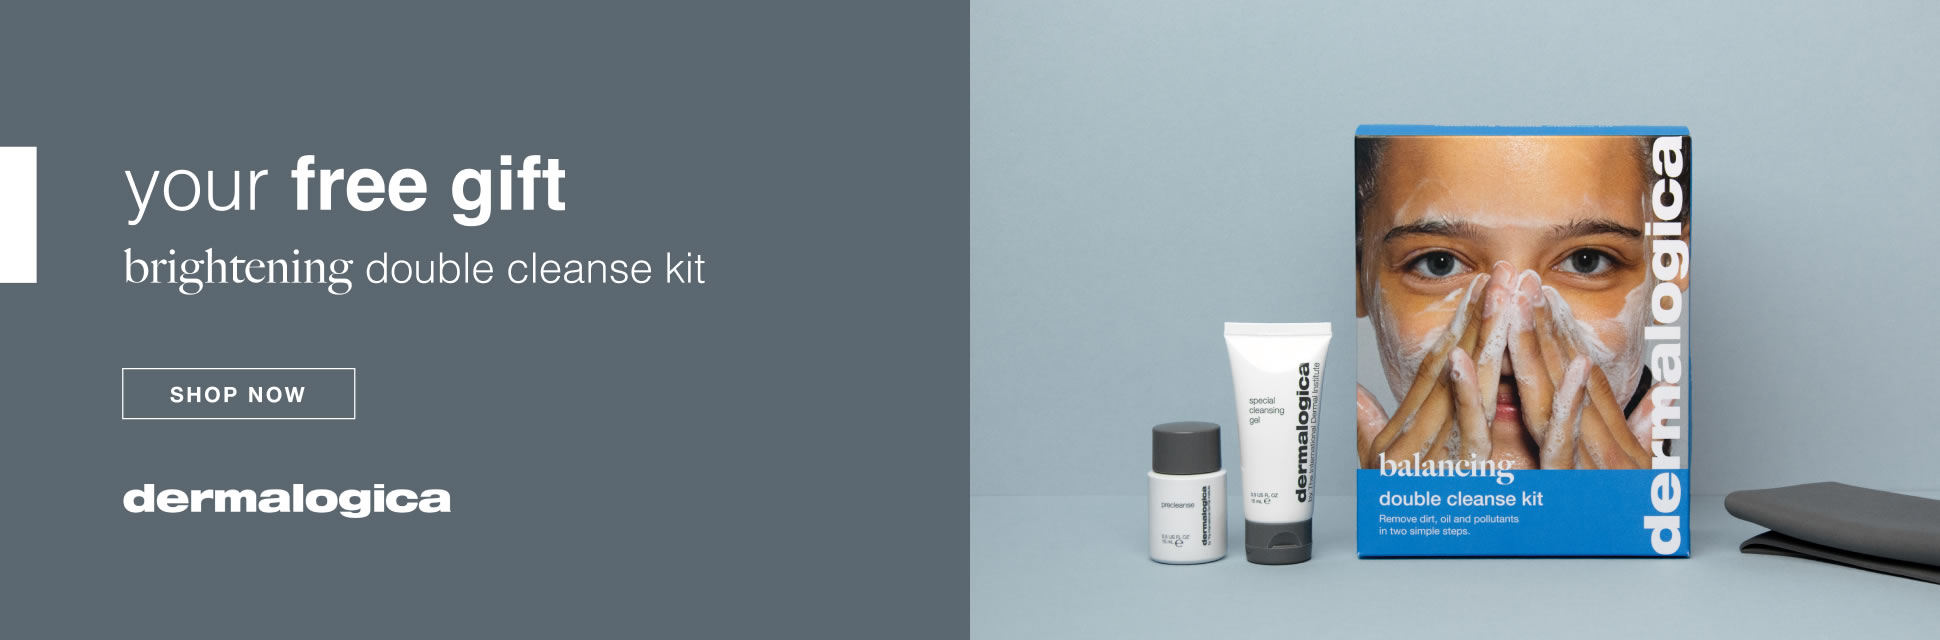 Free Dermalogica Double Cleanse Kit